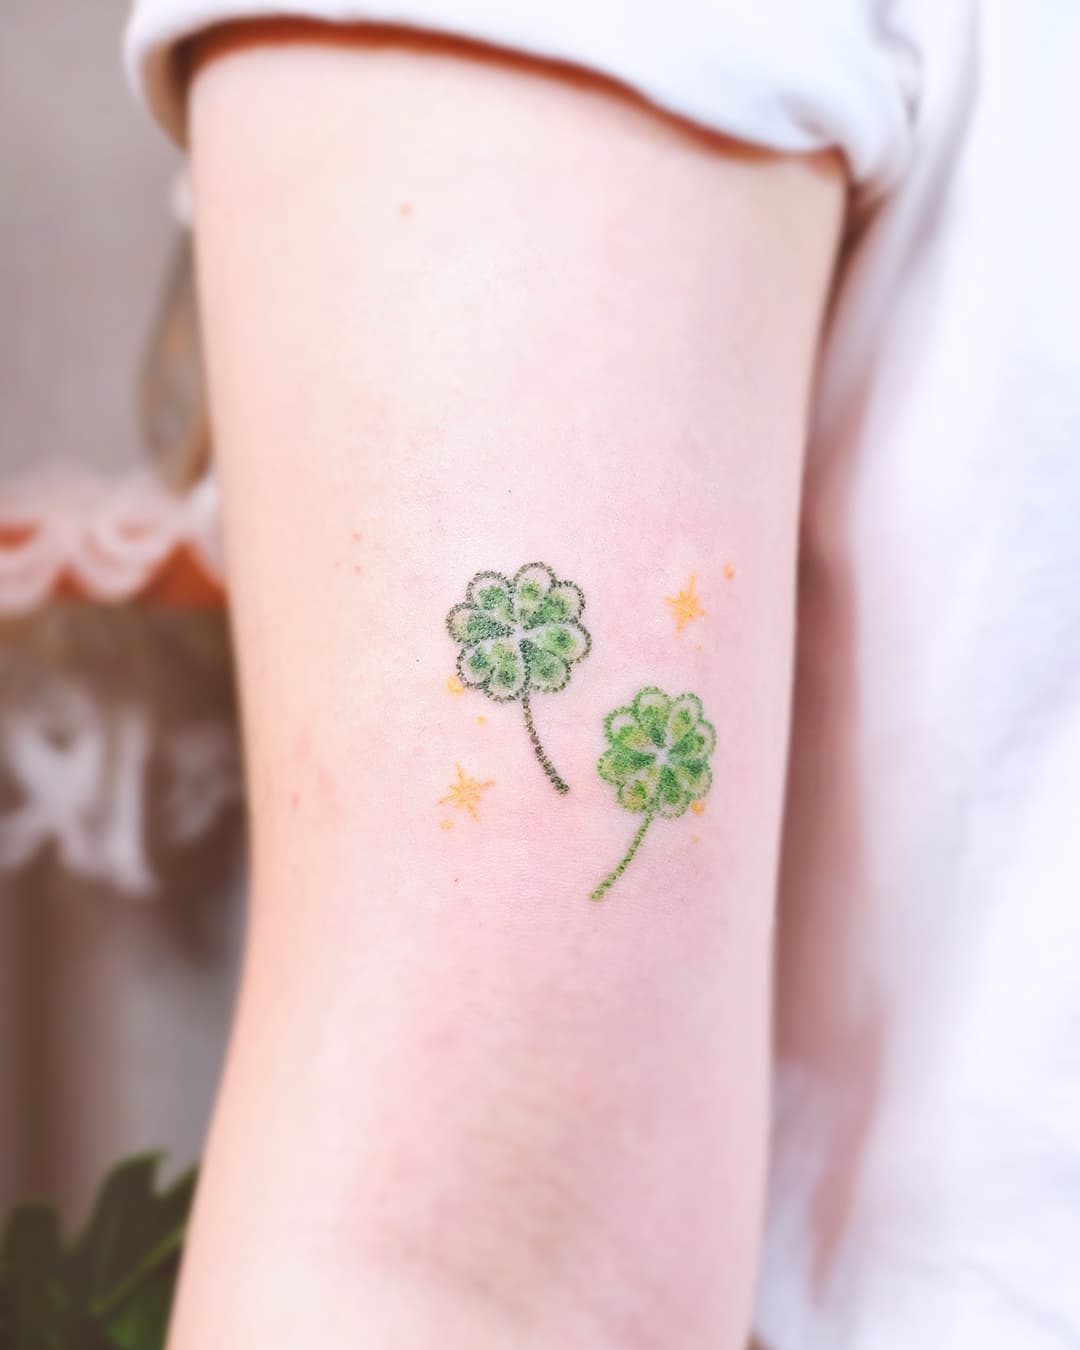 Have always lucky with you FOUR LEAF CLOVER tattoo